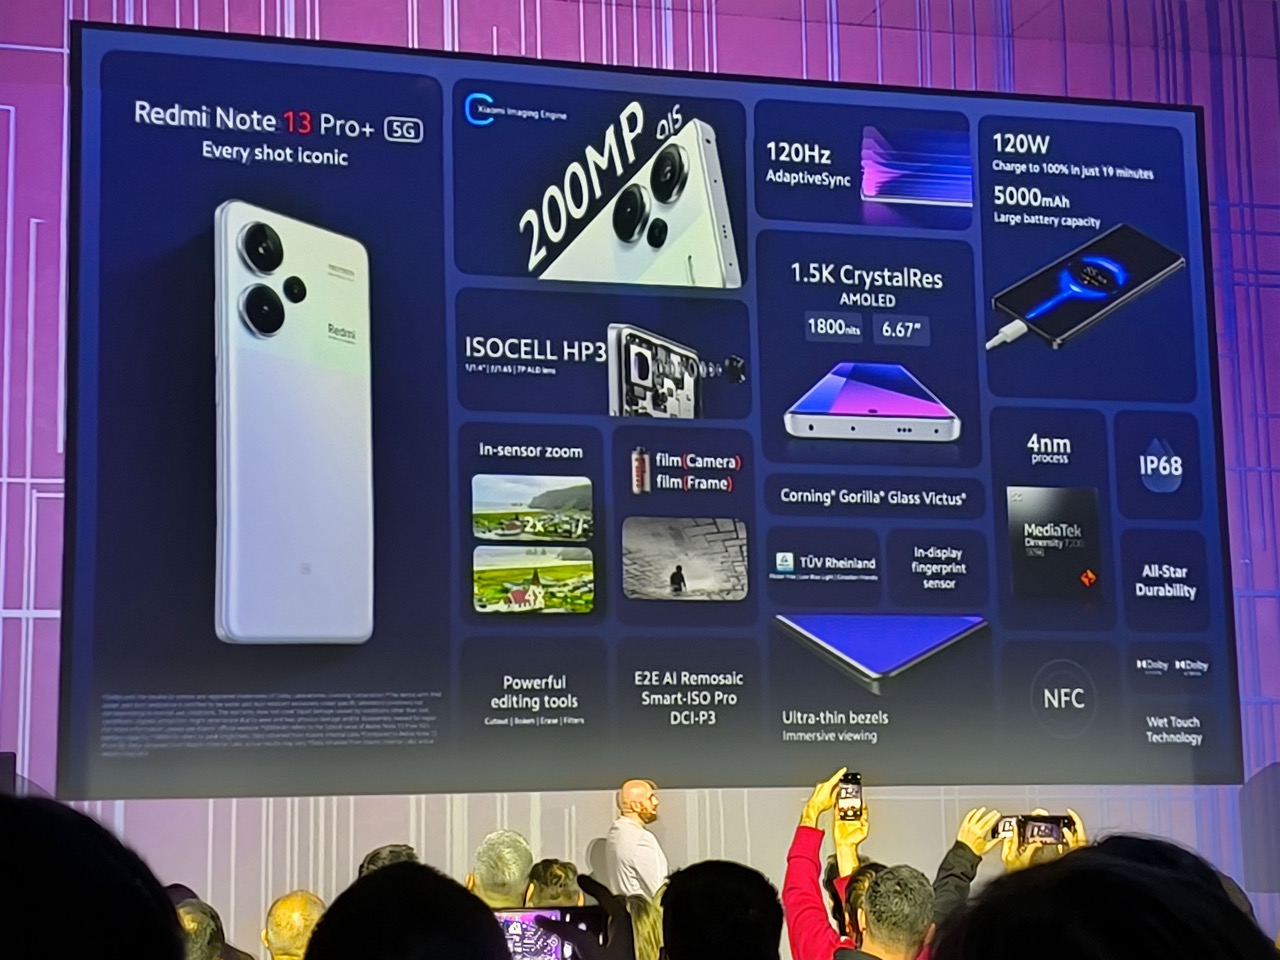 Redmi Note 13 Pro Plus card with specs such ass the 1.5K screen resolution, Dimensity main SoC and 200MP OIS-EIS camera sensor